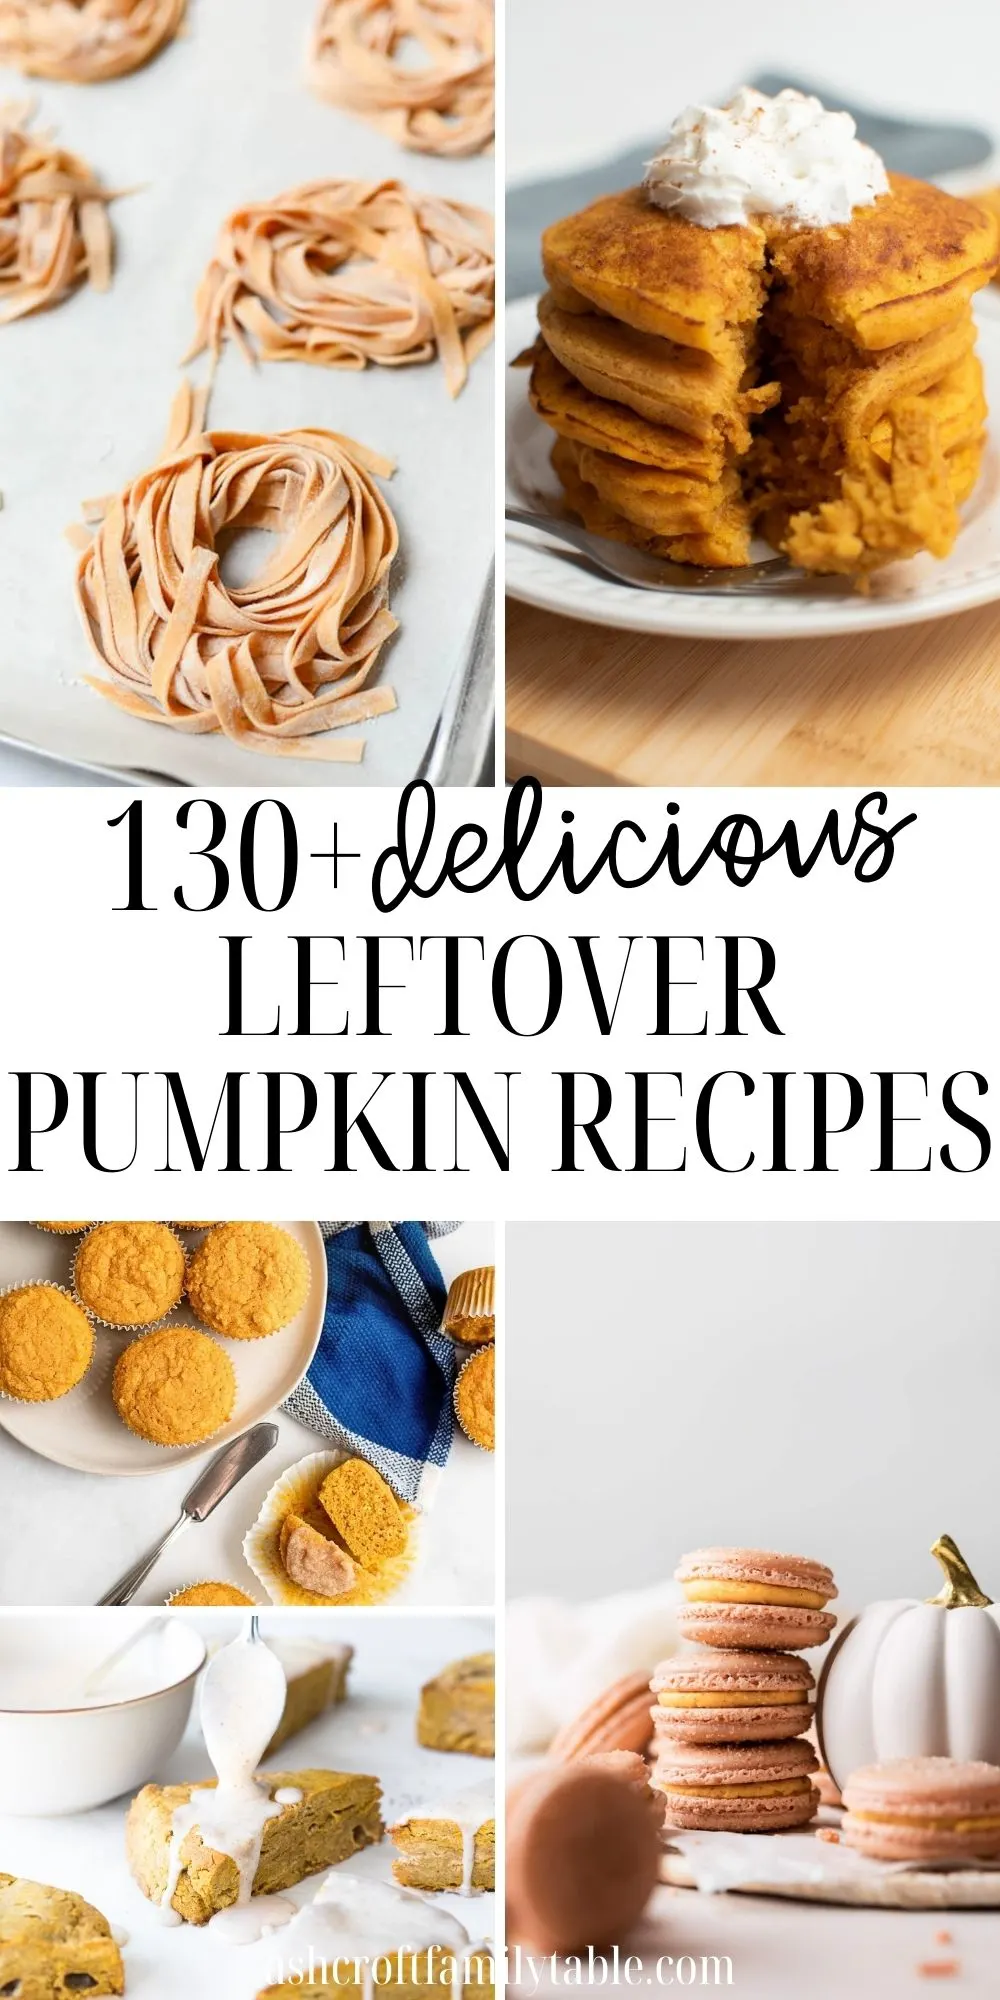 Pinterest graphic with text and collage of finished pumpkin recipes.